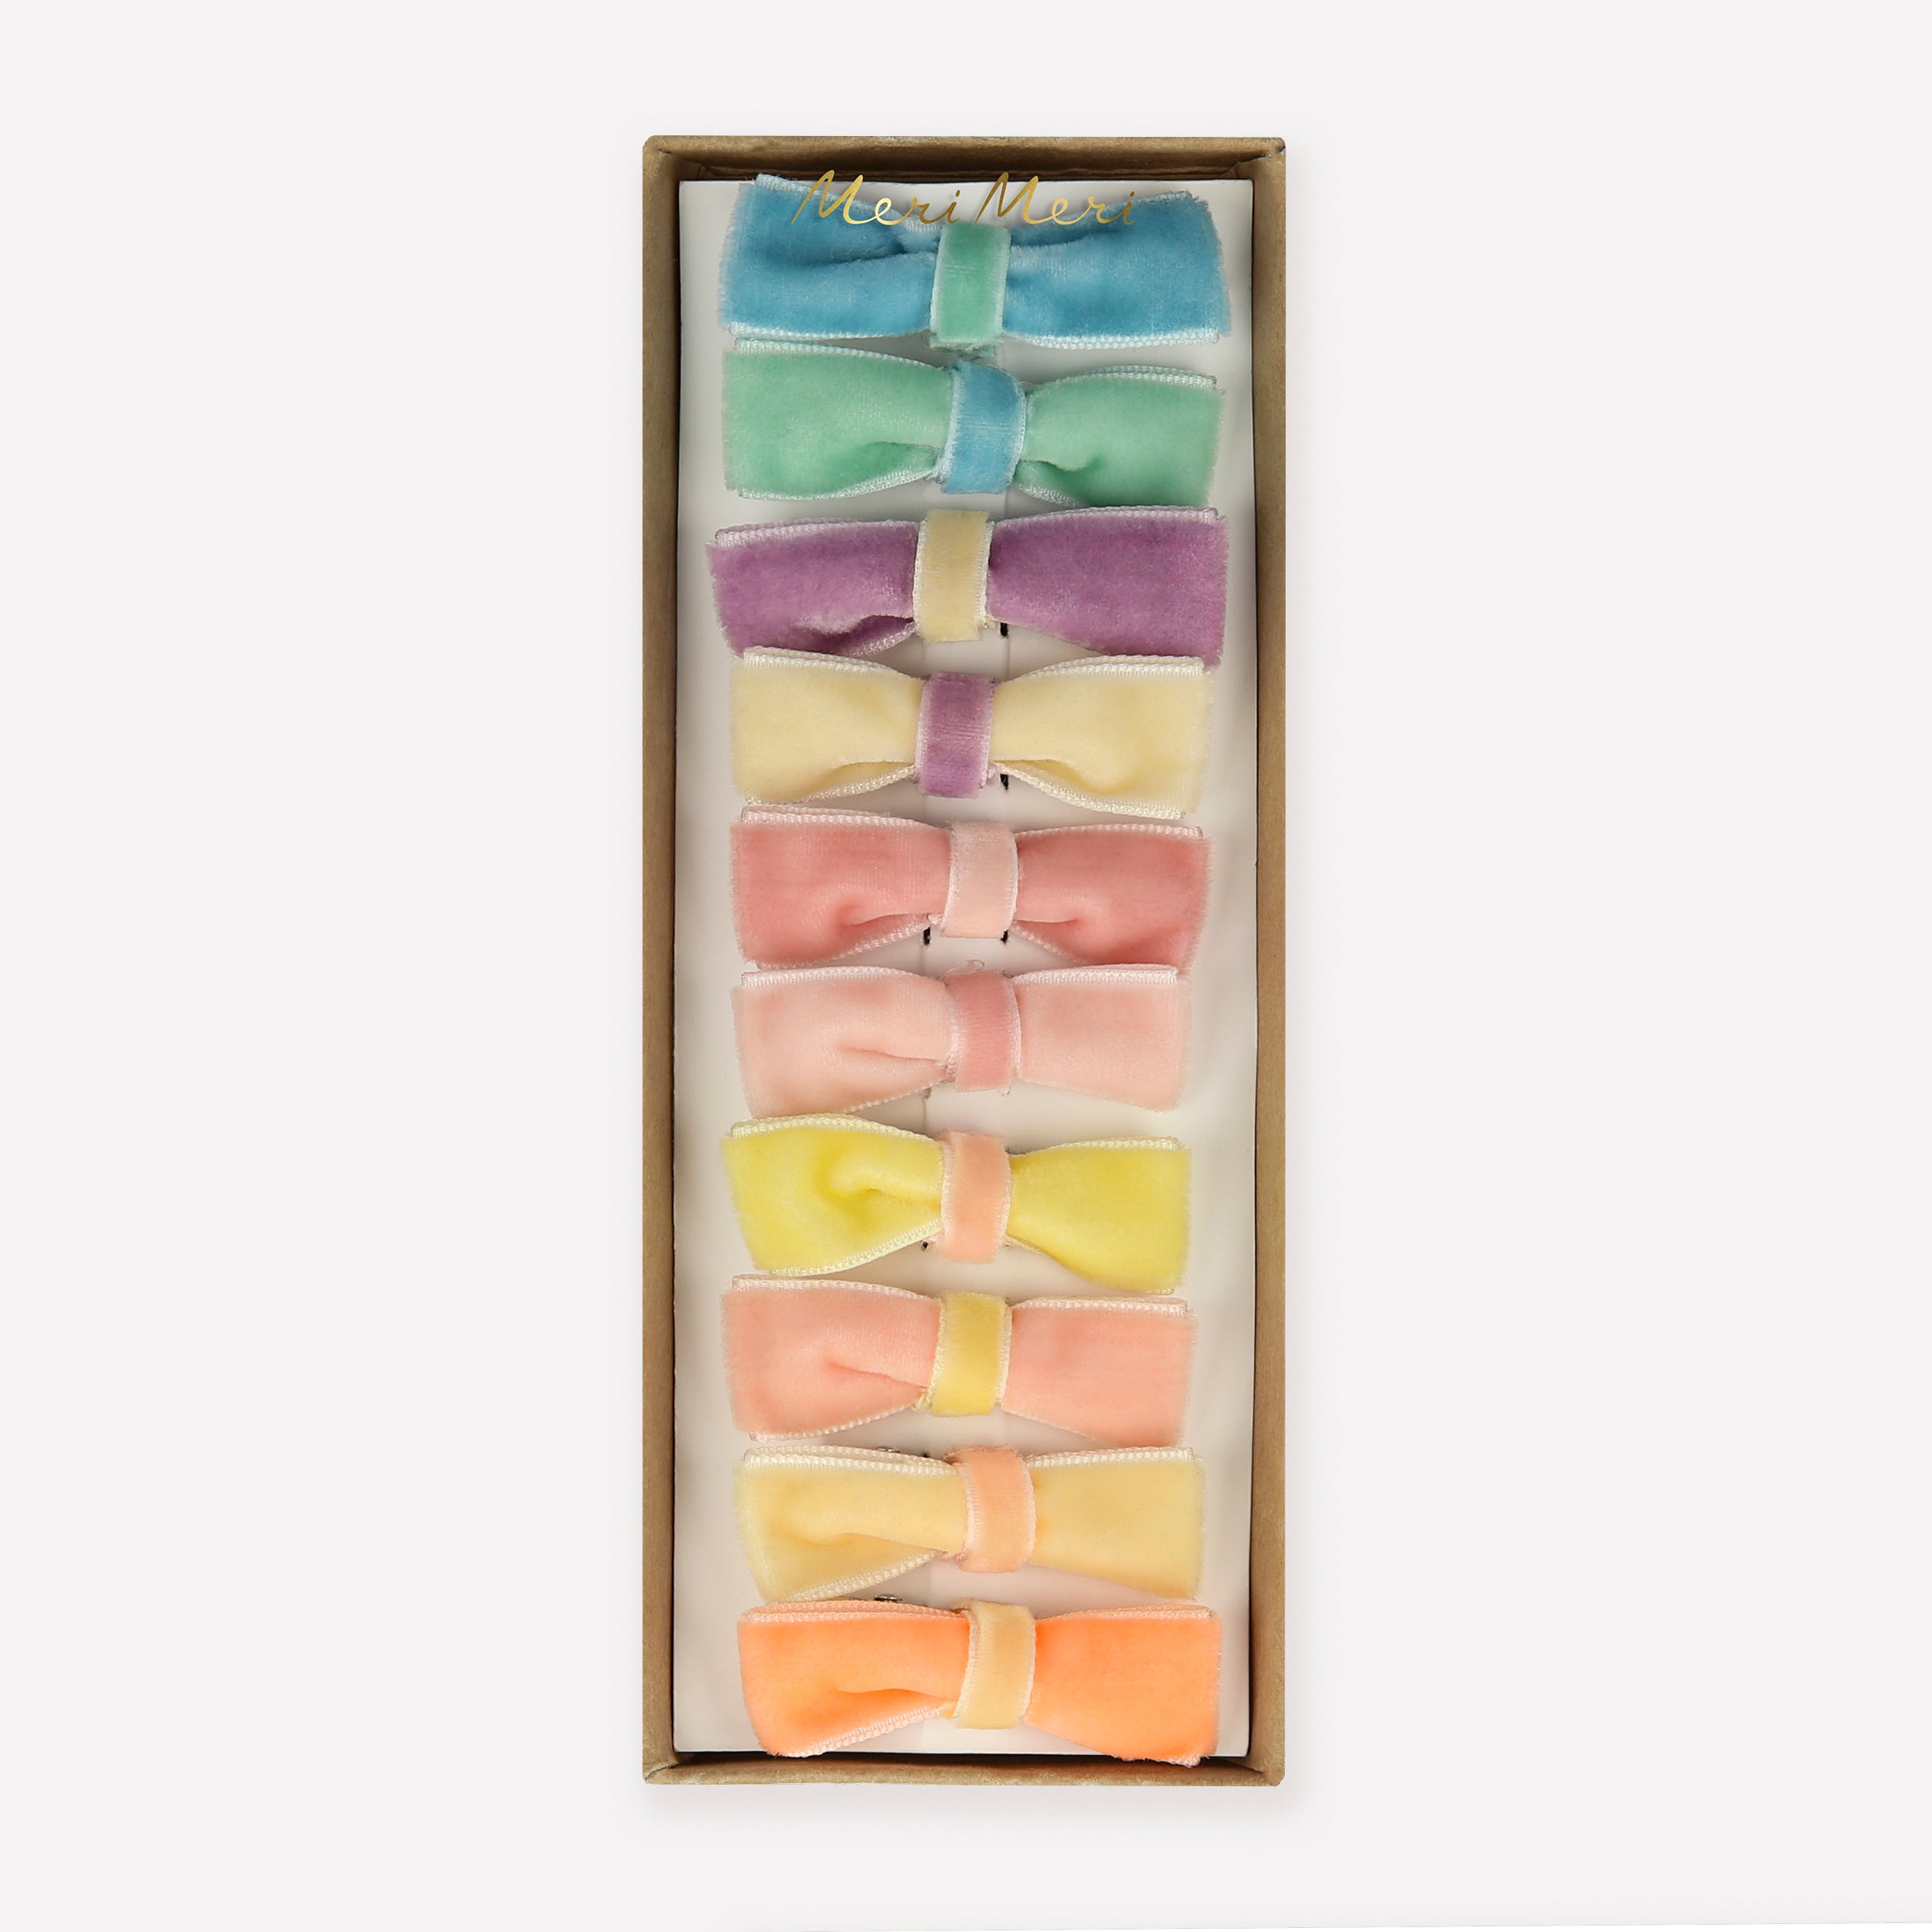 Our mini bows for hair are crafted from velvet ribbons in pastel shades.